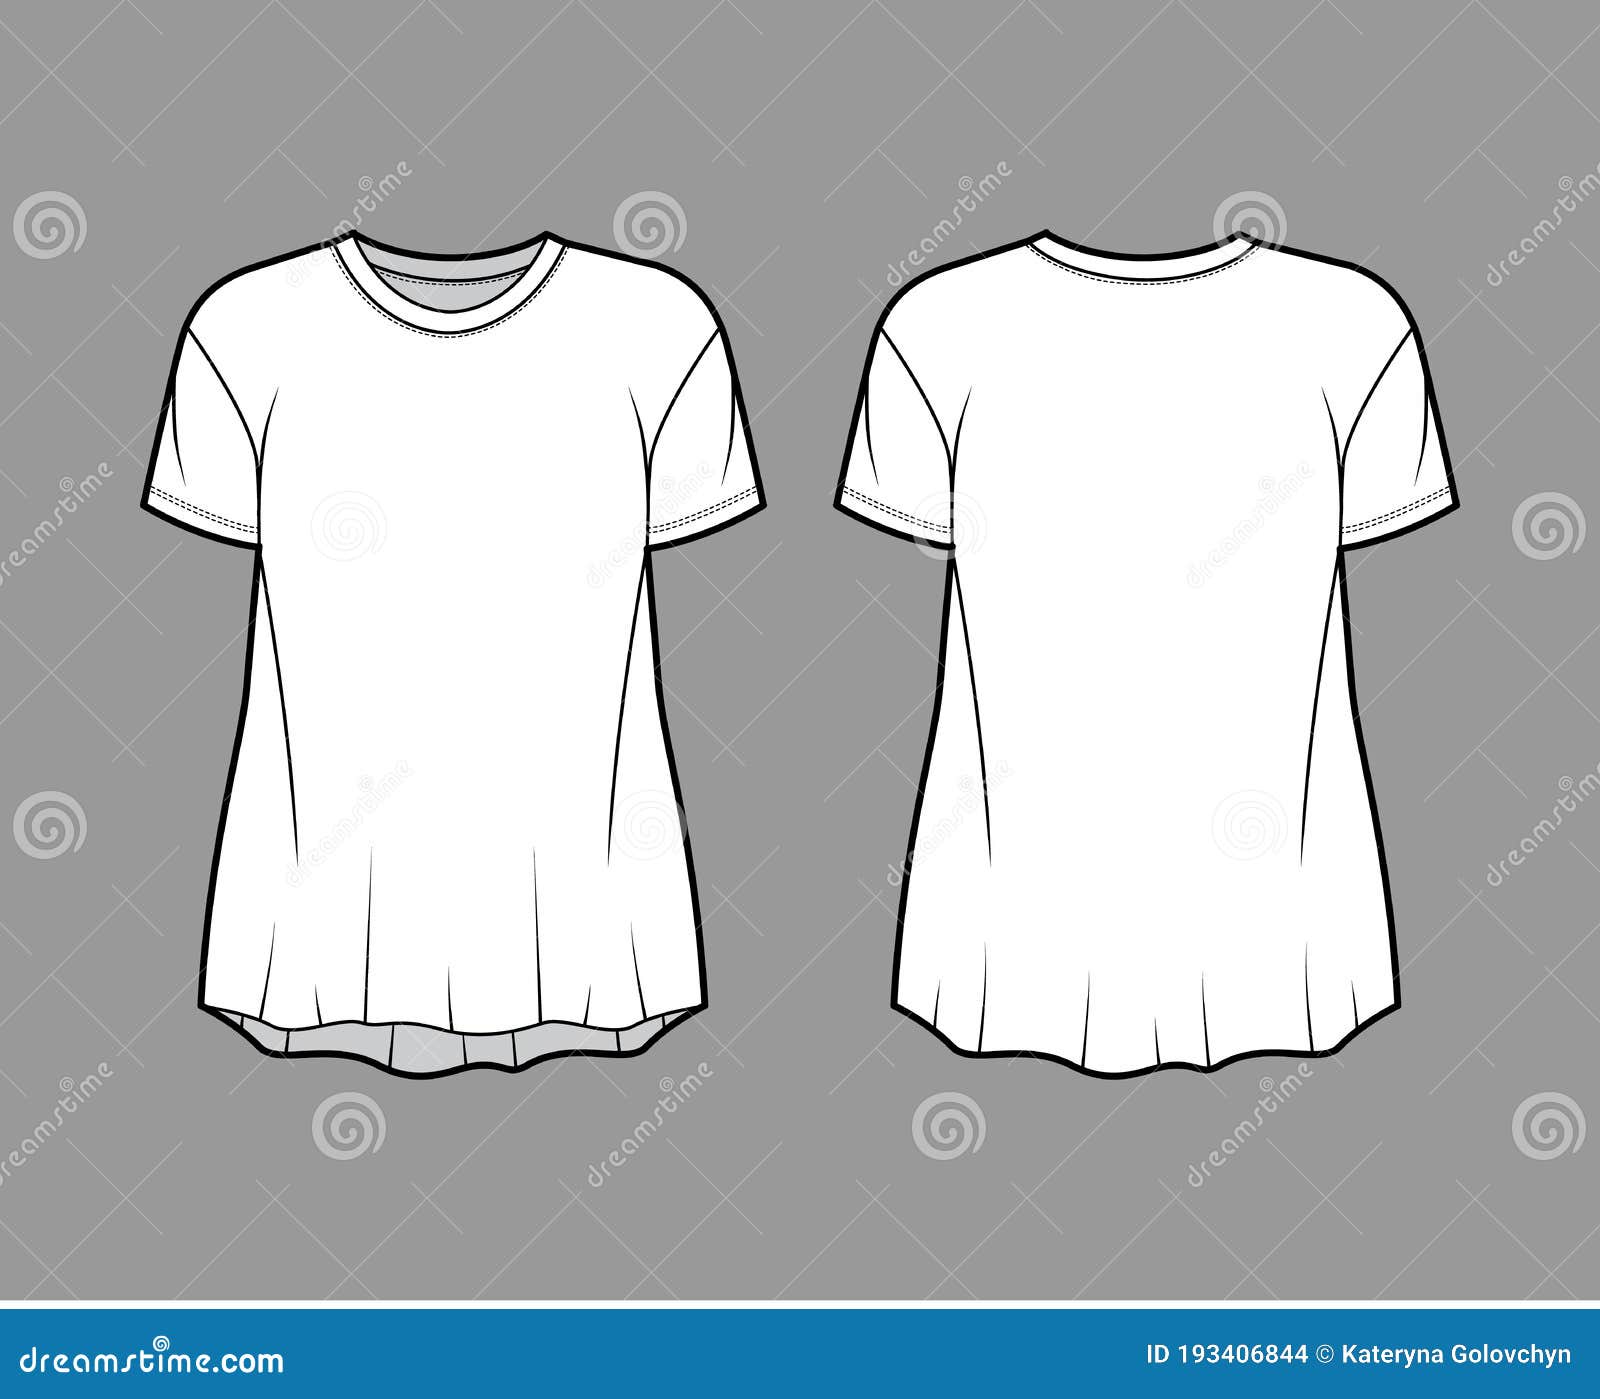 boyfriend slub cotton-jersey t-shirt technical fashion  with crew neck, short sleeves, relaxed silhouette.